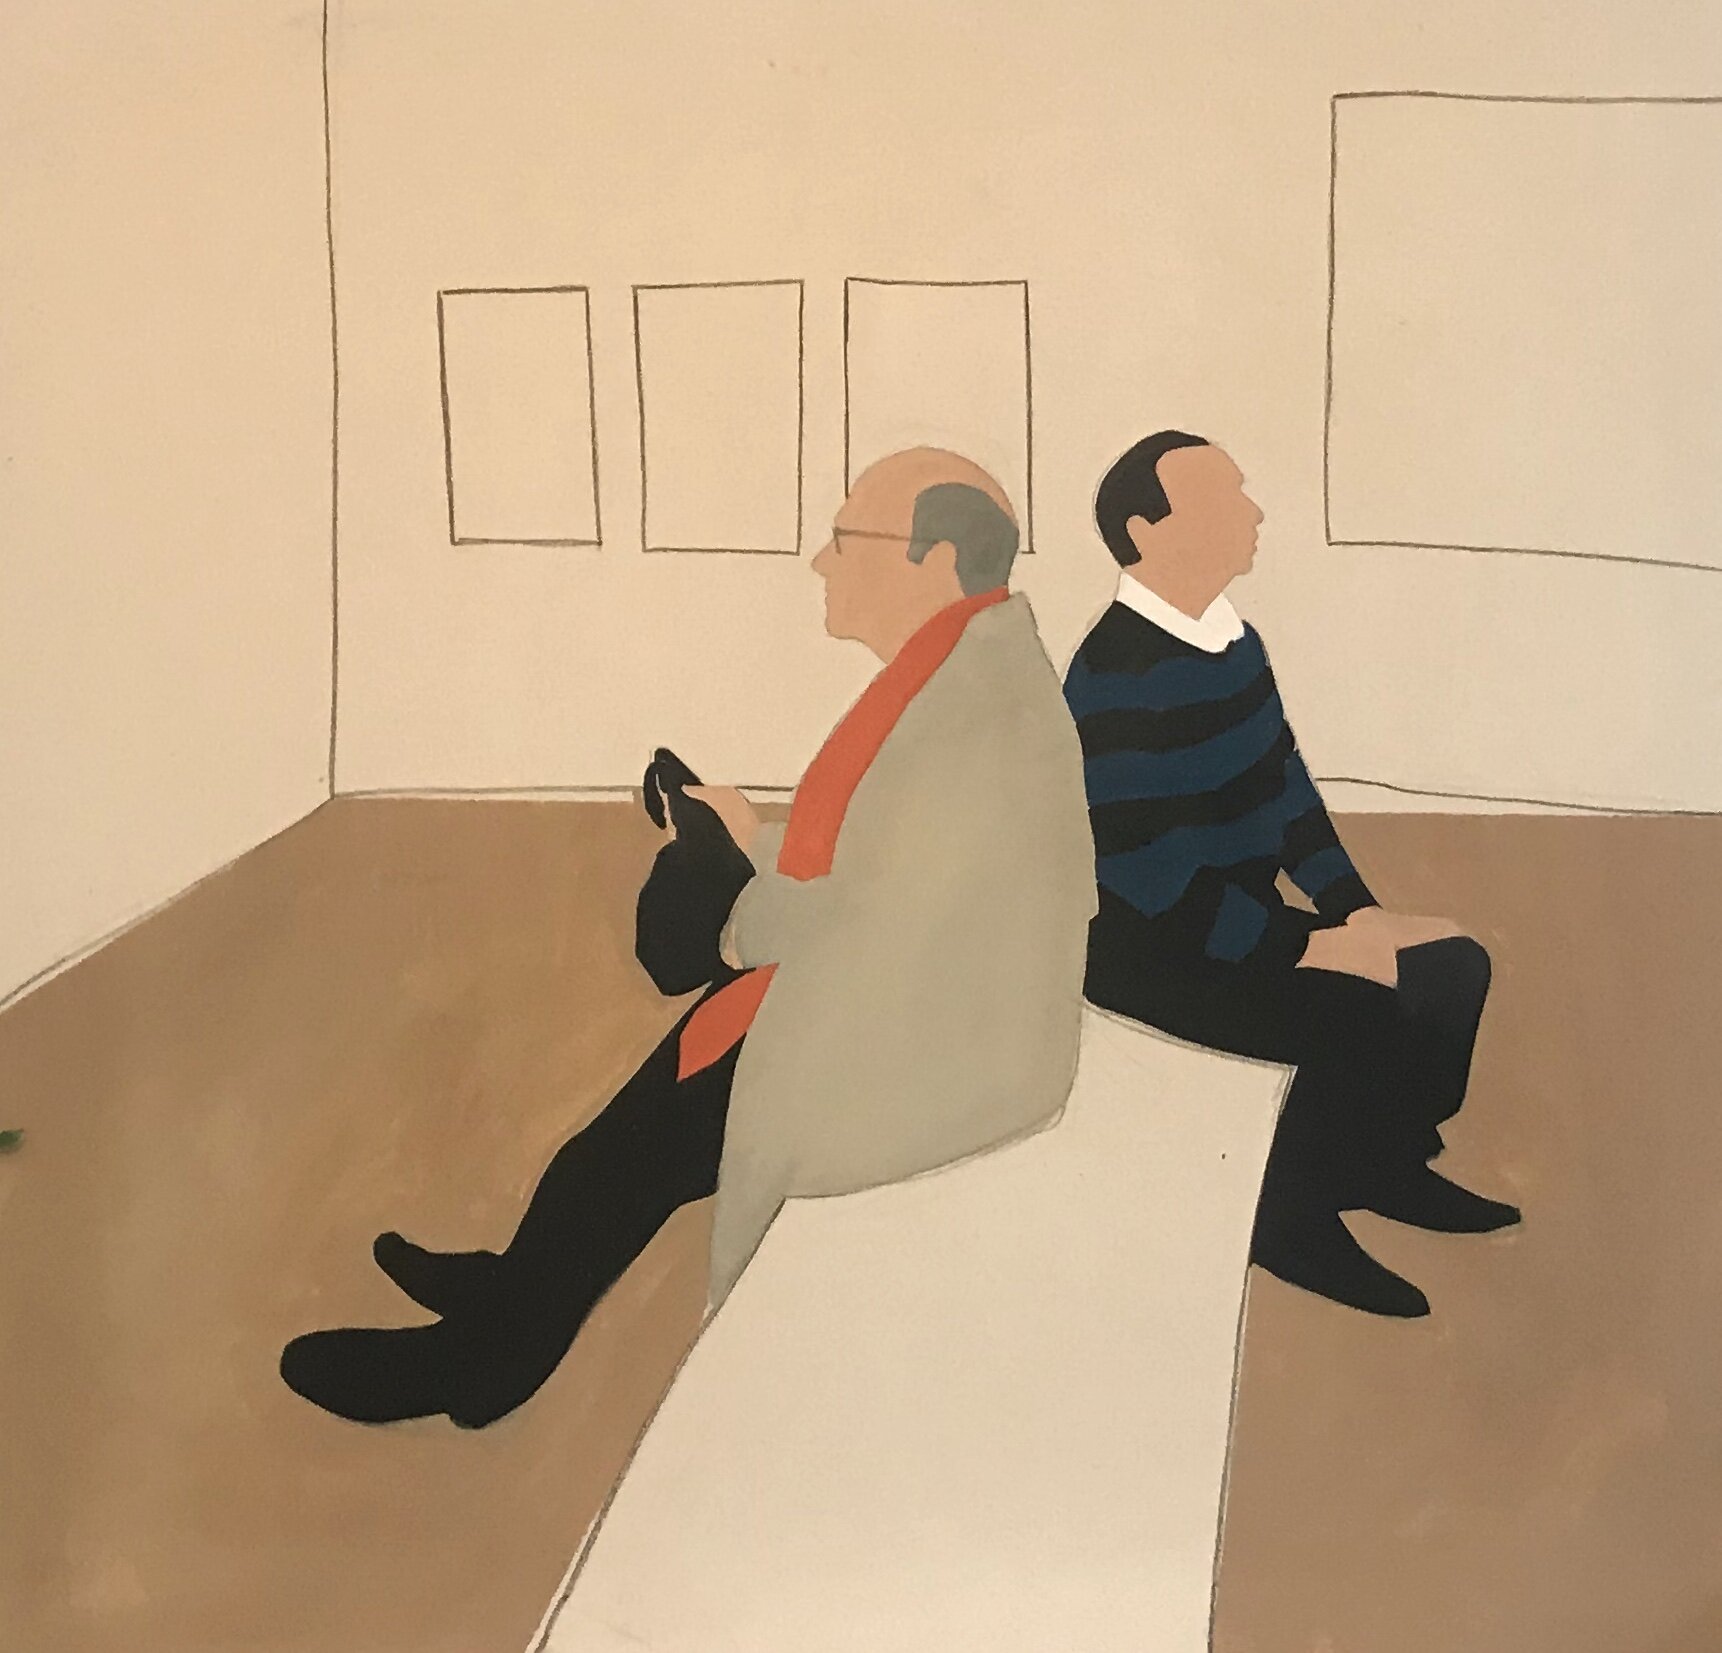  Two Men, Royal Academy  Oil and Charcoal on Canvas  120 x 110 cm   